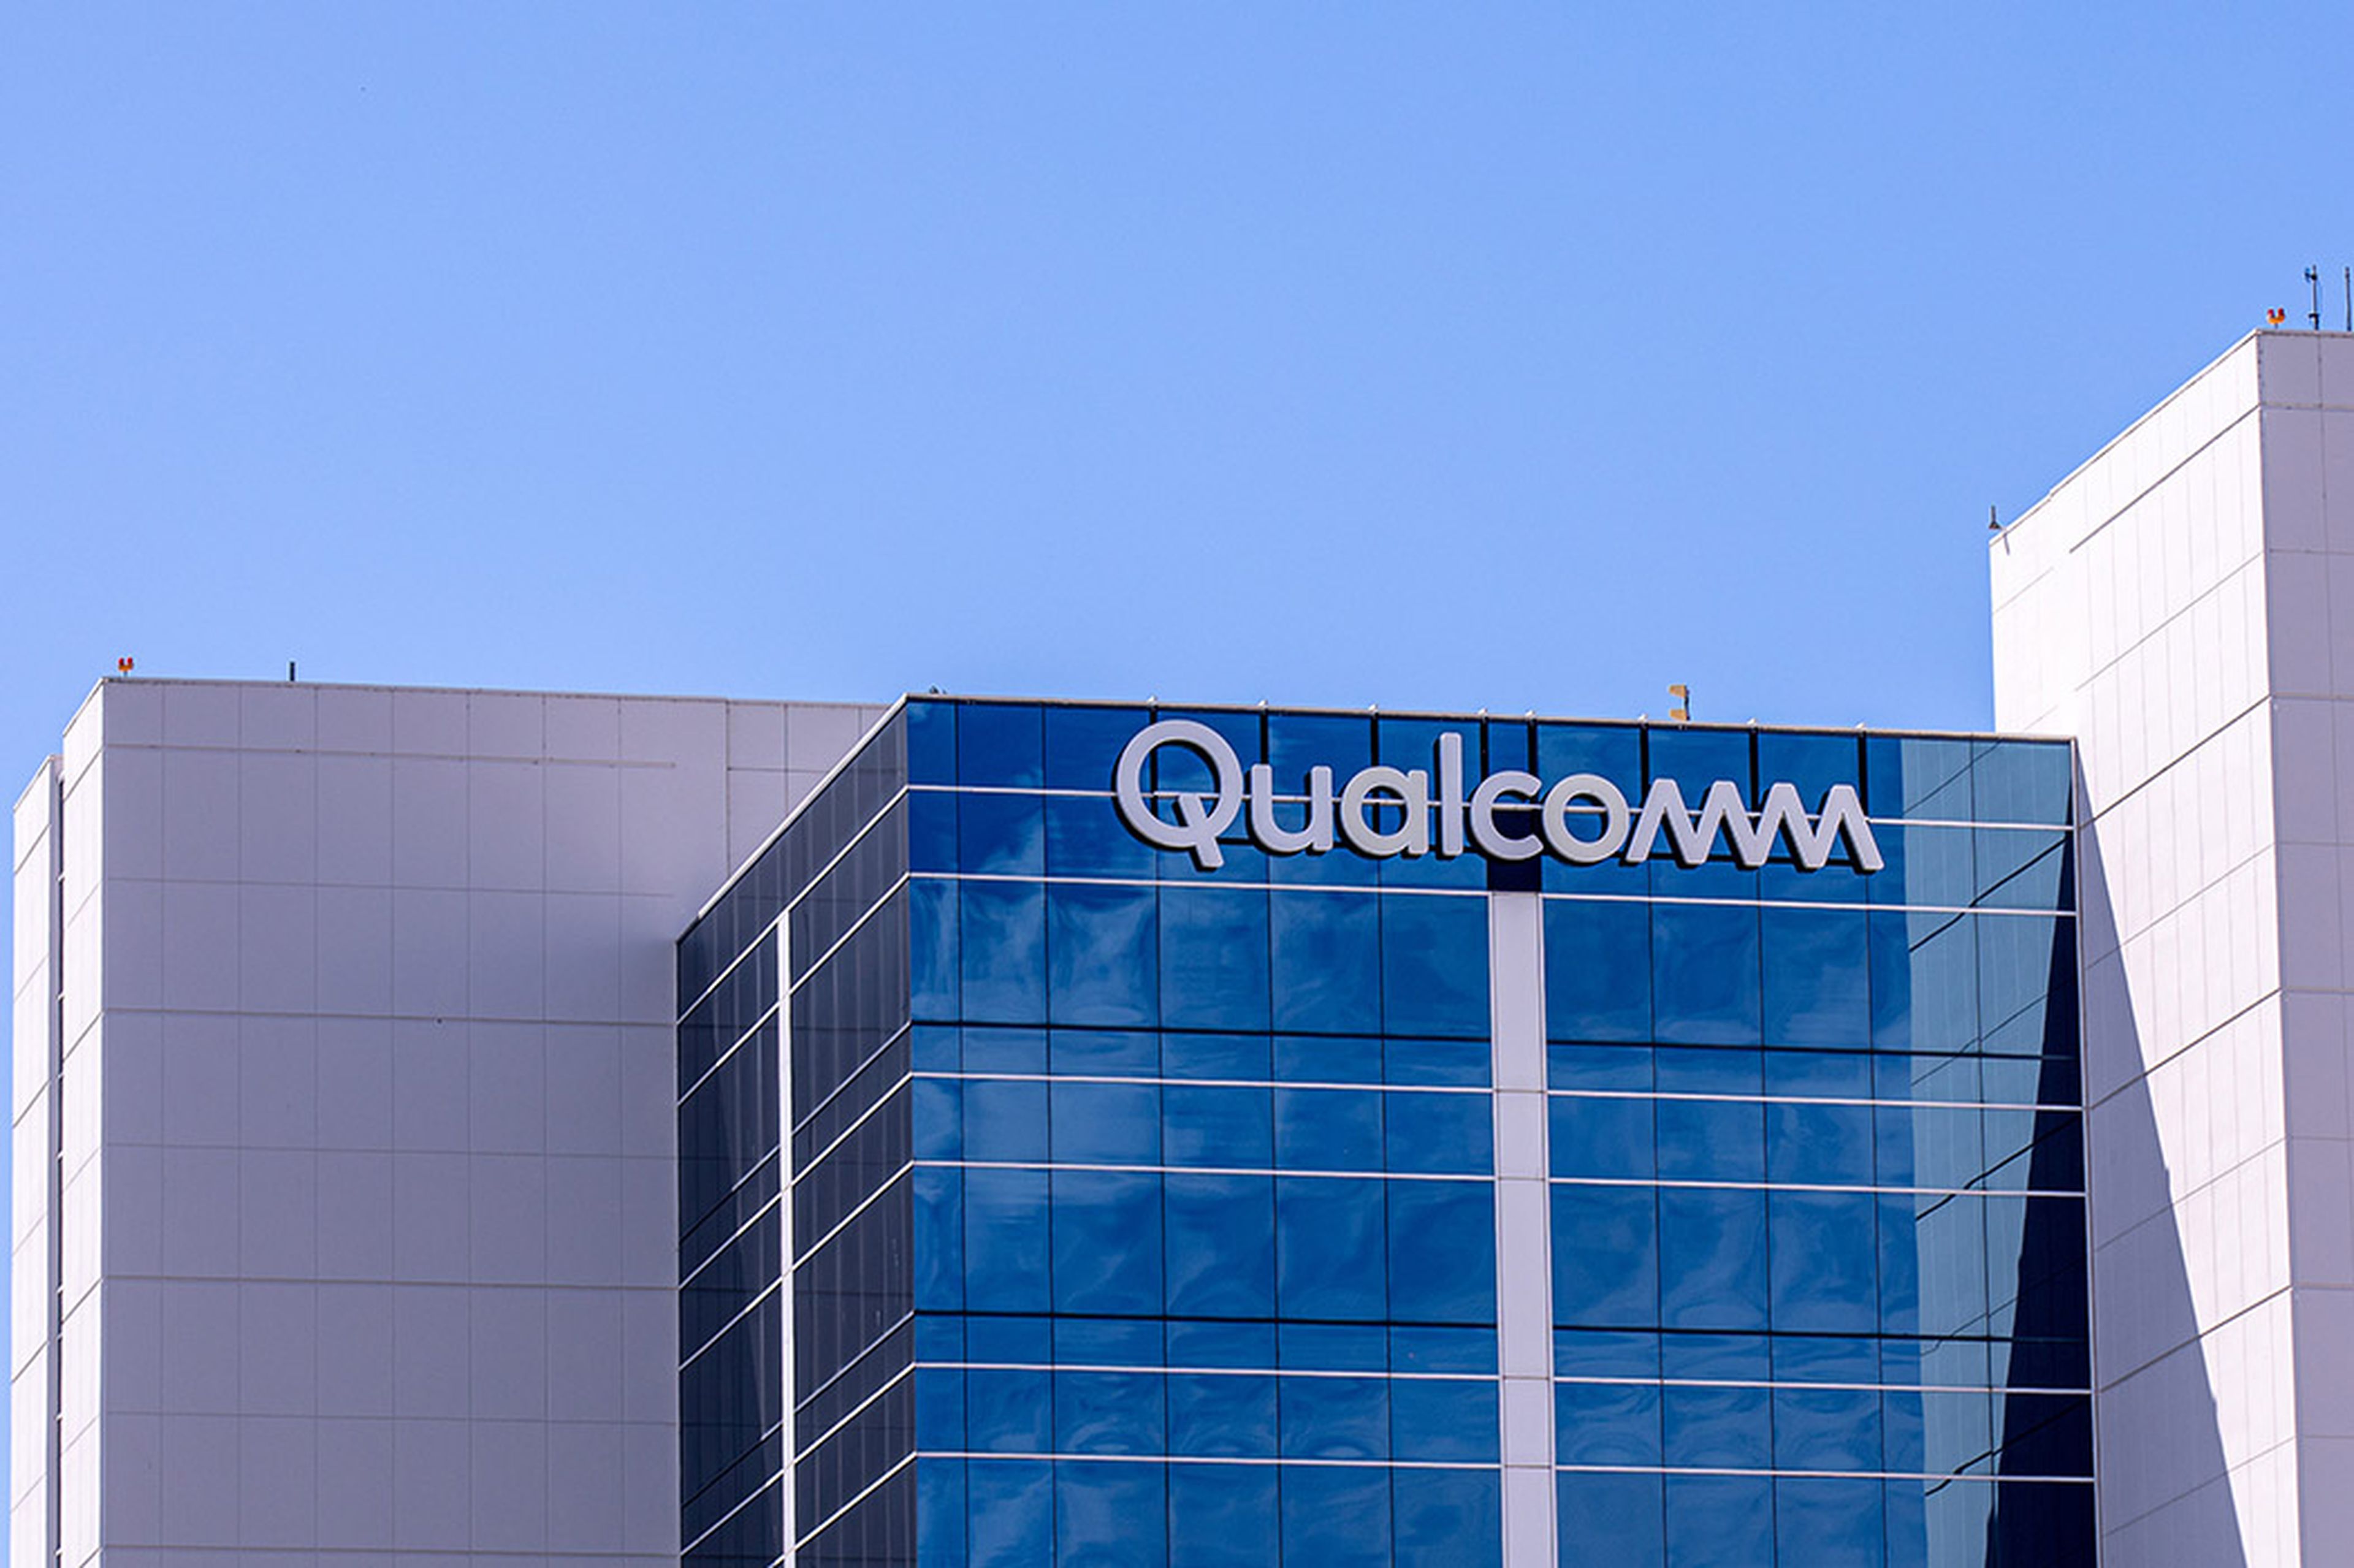 Sign and logo of Qualcomm company on a side of a building.